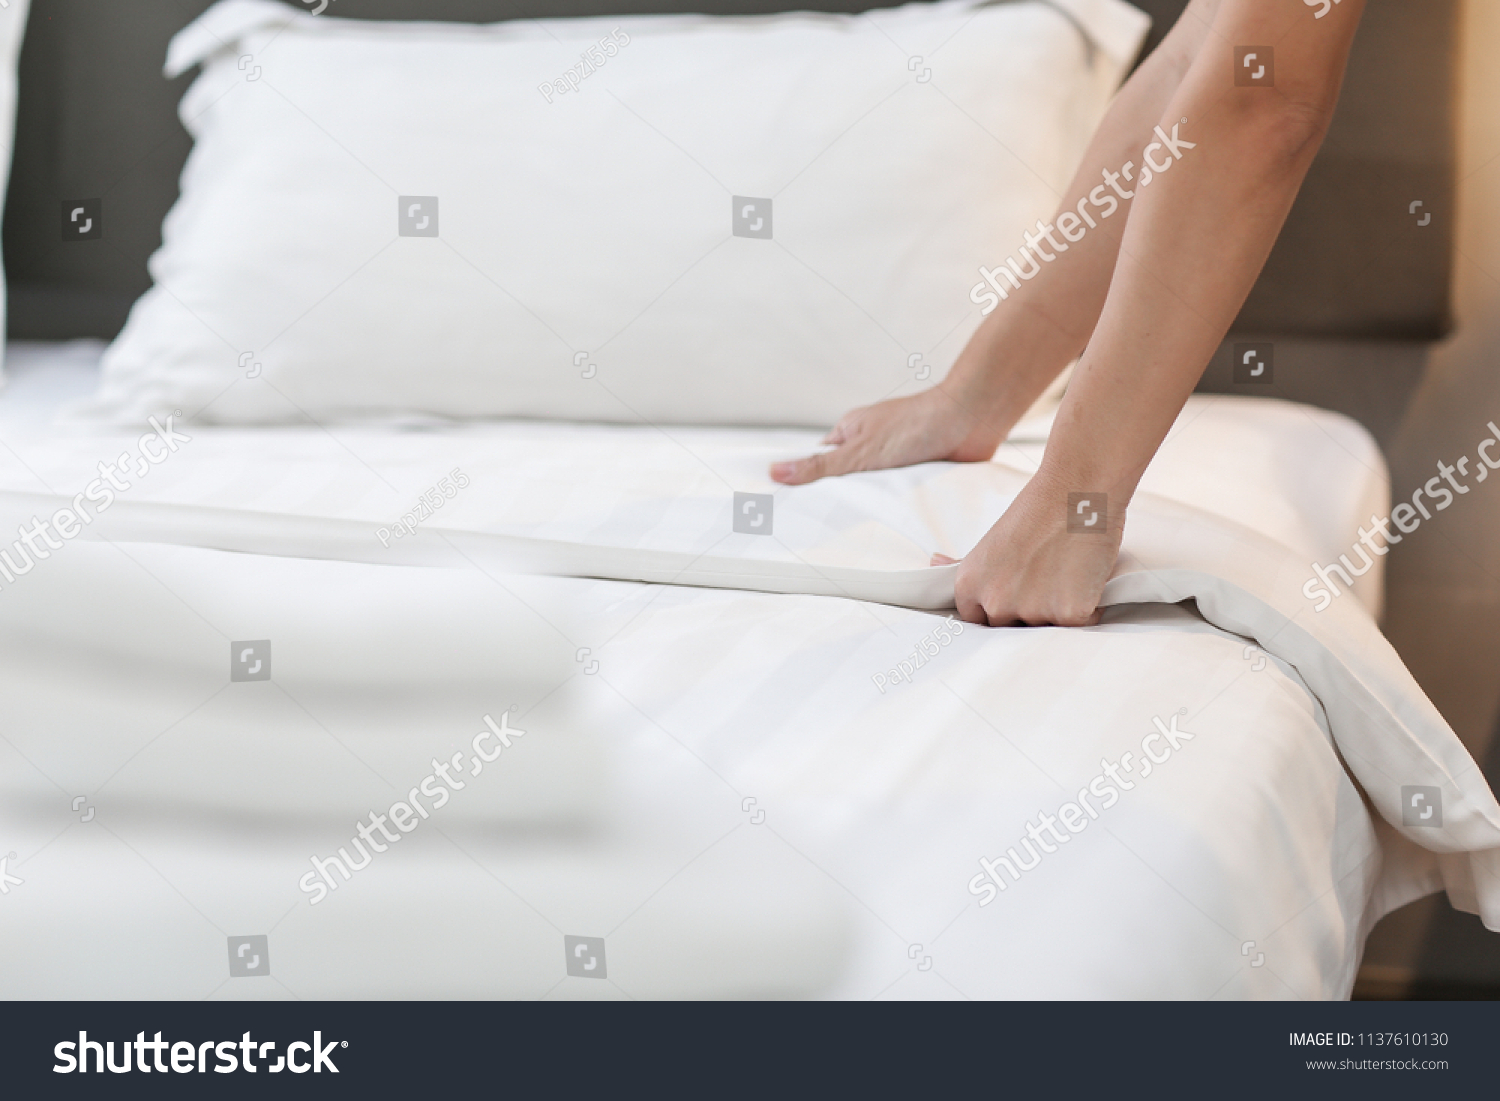 Hands Making Bed from Hotel Room Service #1137610130